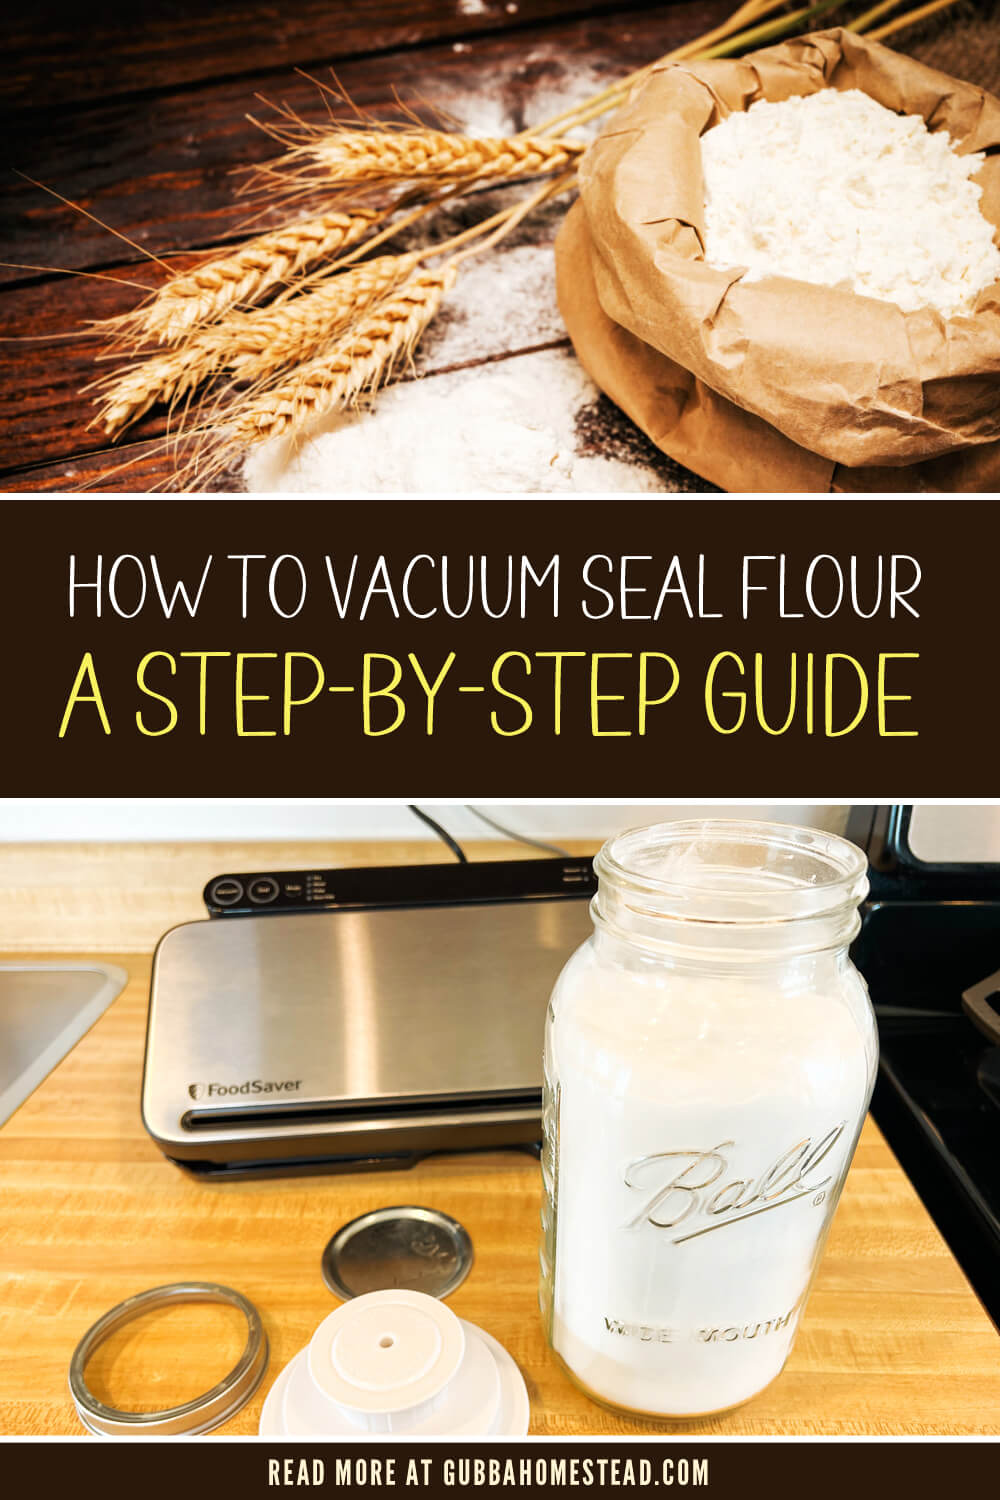 How To Vacuum Seal Flour - Step by Step Guide